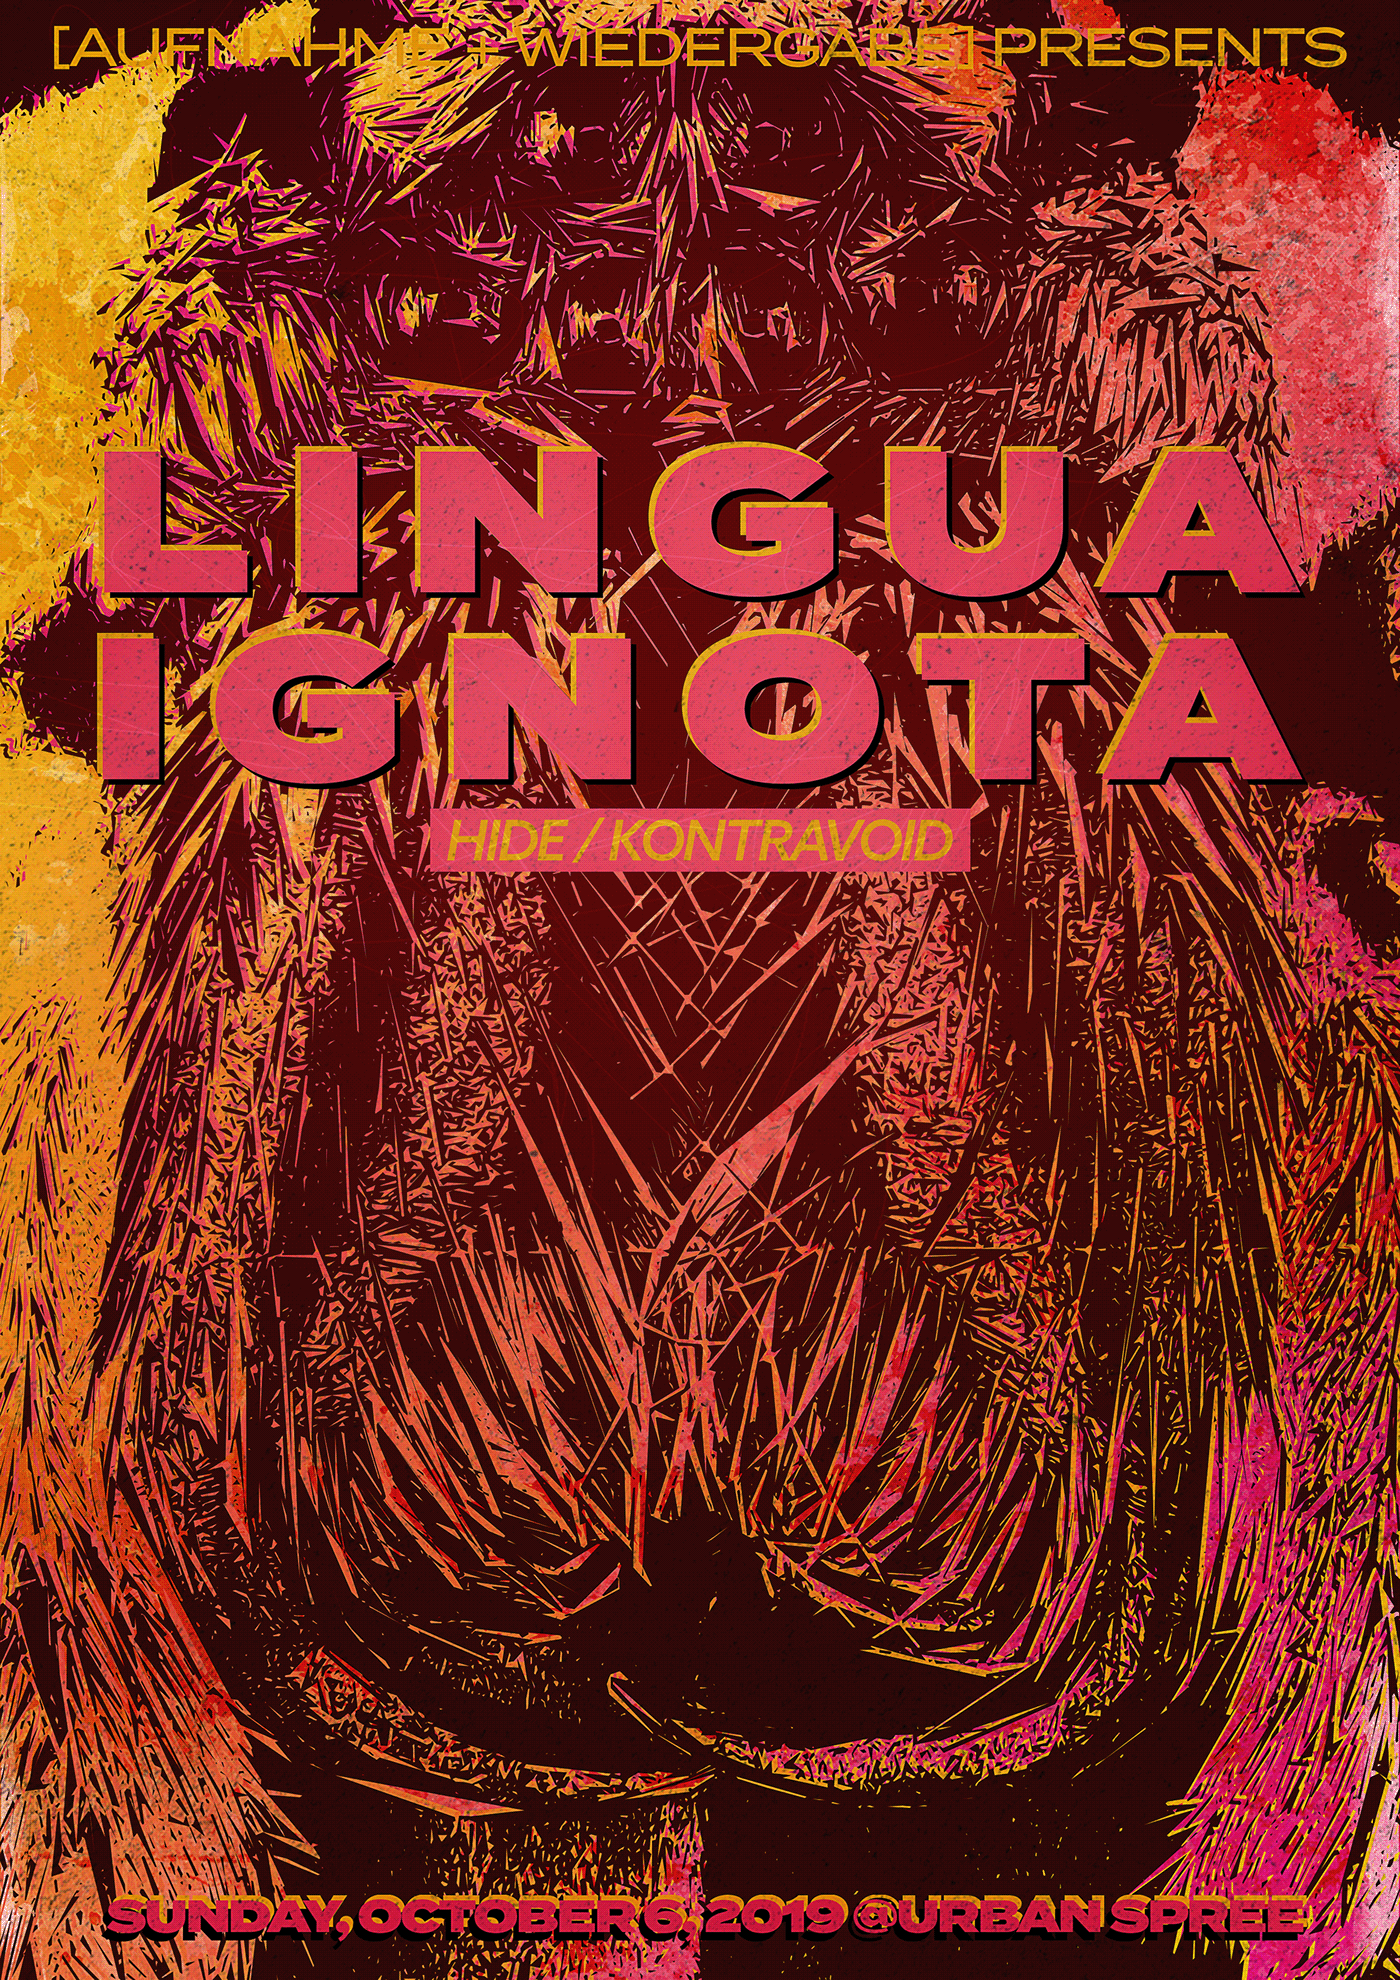 Lingua Ignota spider noise music music poster berlin Urban Spree music poster